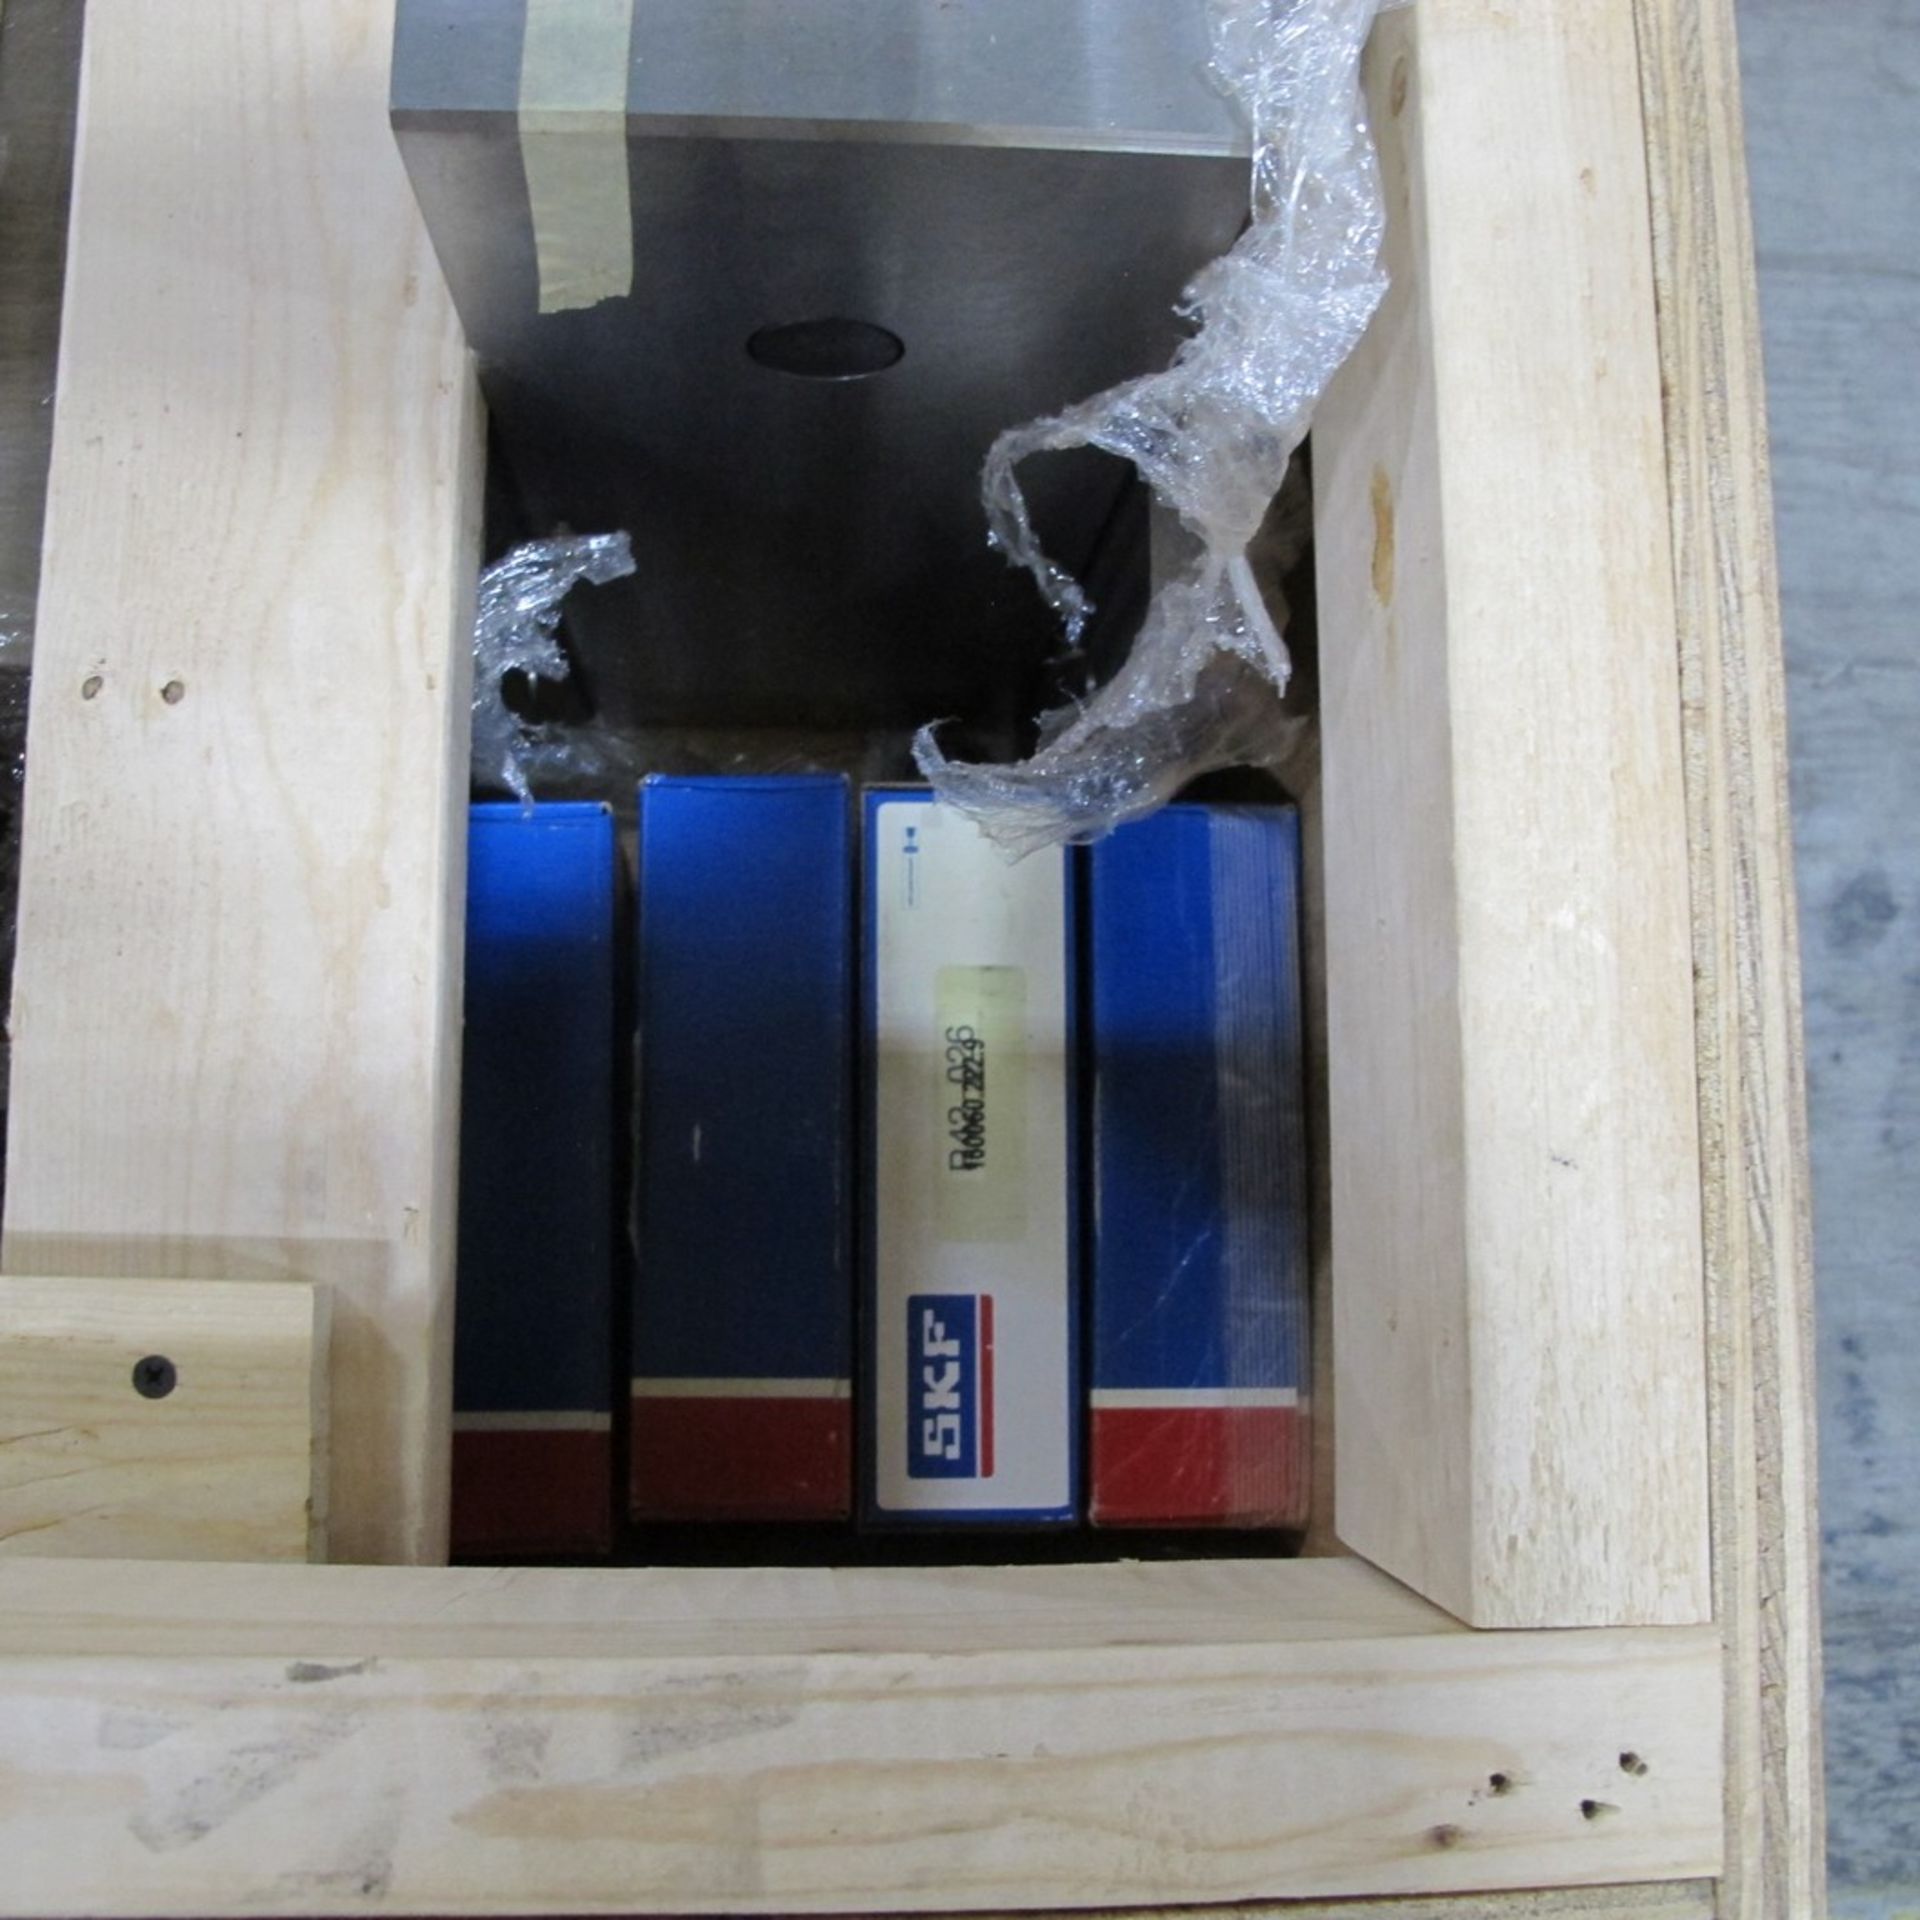 CASE/CRATE OF (4) EMBOSSER BLOCKS W/ BEARINGS (WEST CENTER PLANT) - Image 2 of 3